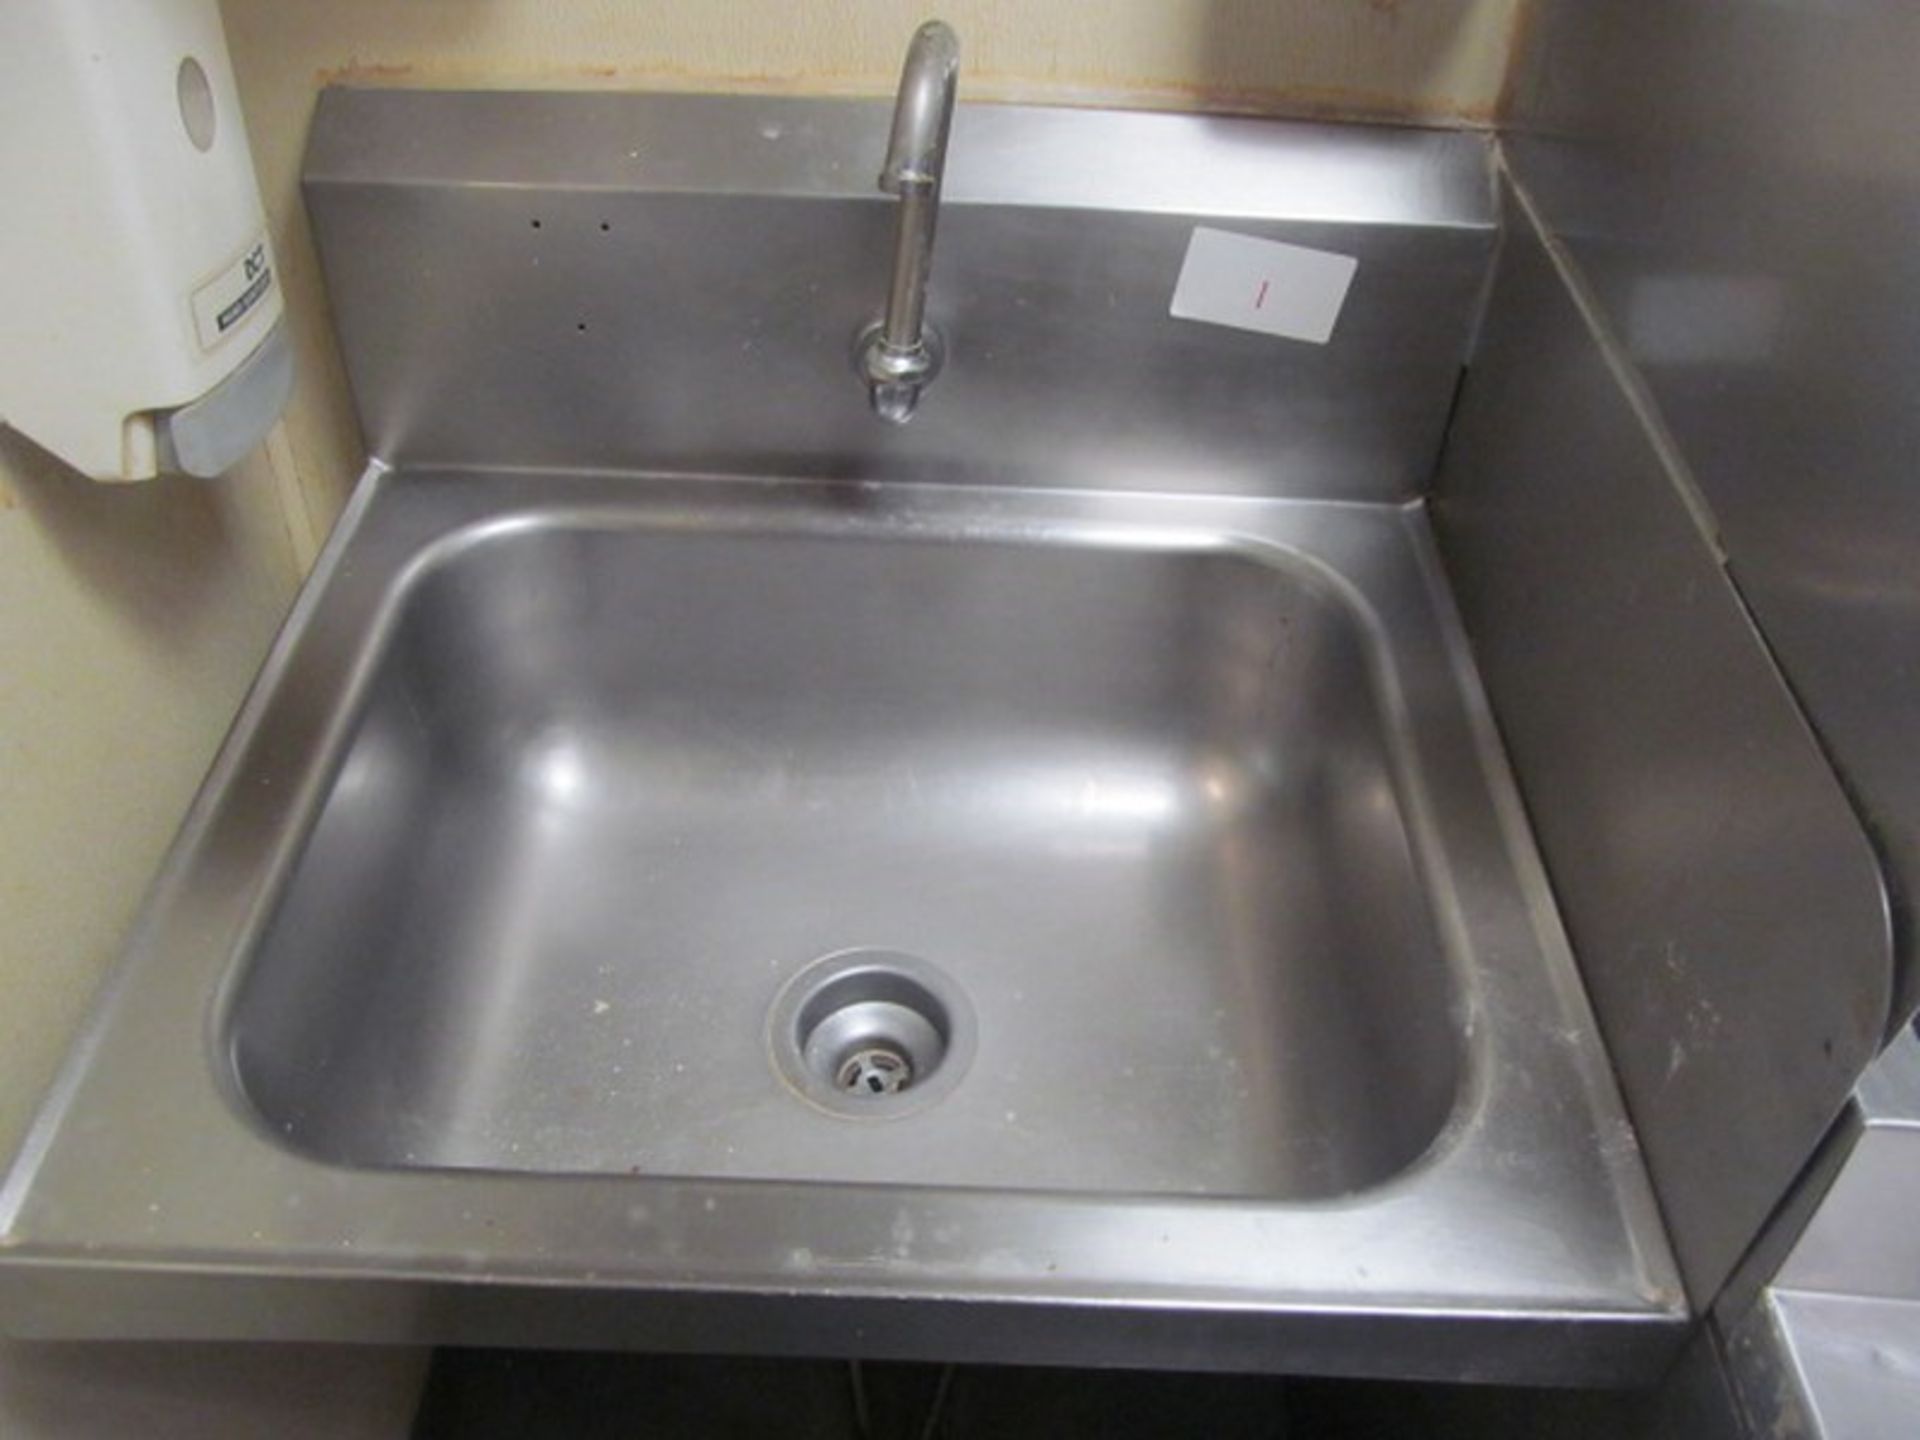 Hand Sink, Wall Mount - No Foot Pedal - Image 2 of 2